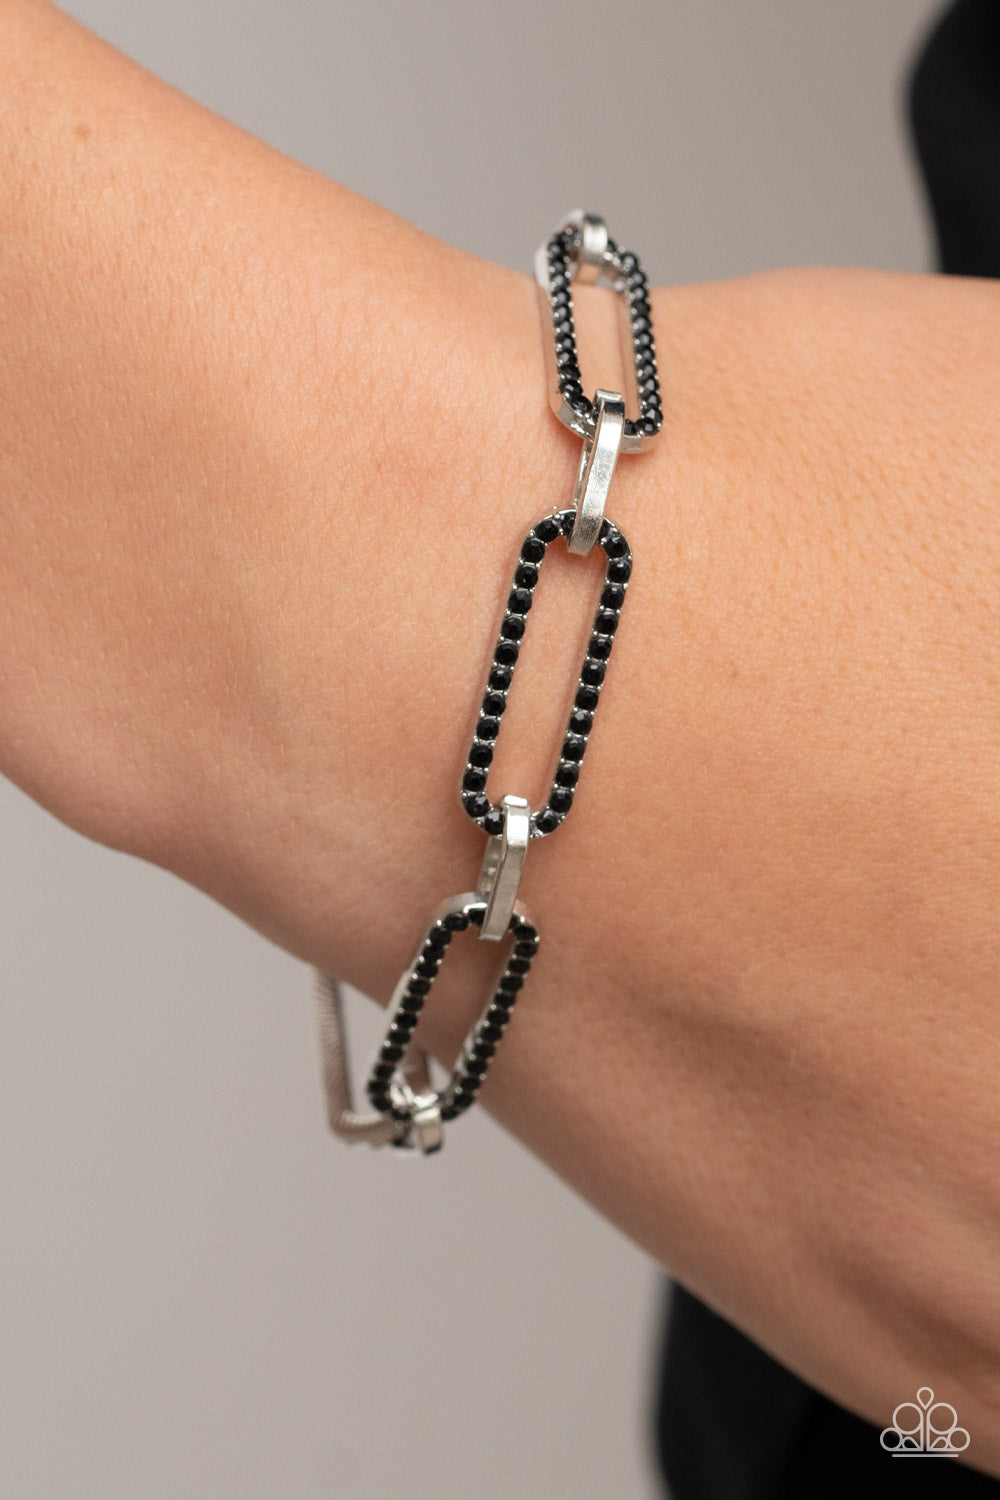 Still Not OVAL You - Black and Silver Bracelet - Paparazzi Accessories - Dotted in dainty black rhinestones, oblong silver frames link with shiny silver fittings around the wrist for a timeless twinkle. Features an adjustable clasp closure. Sold as one individual bracelet.